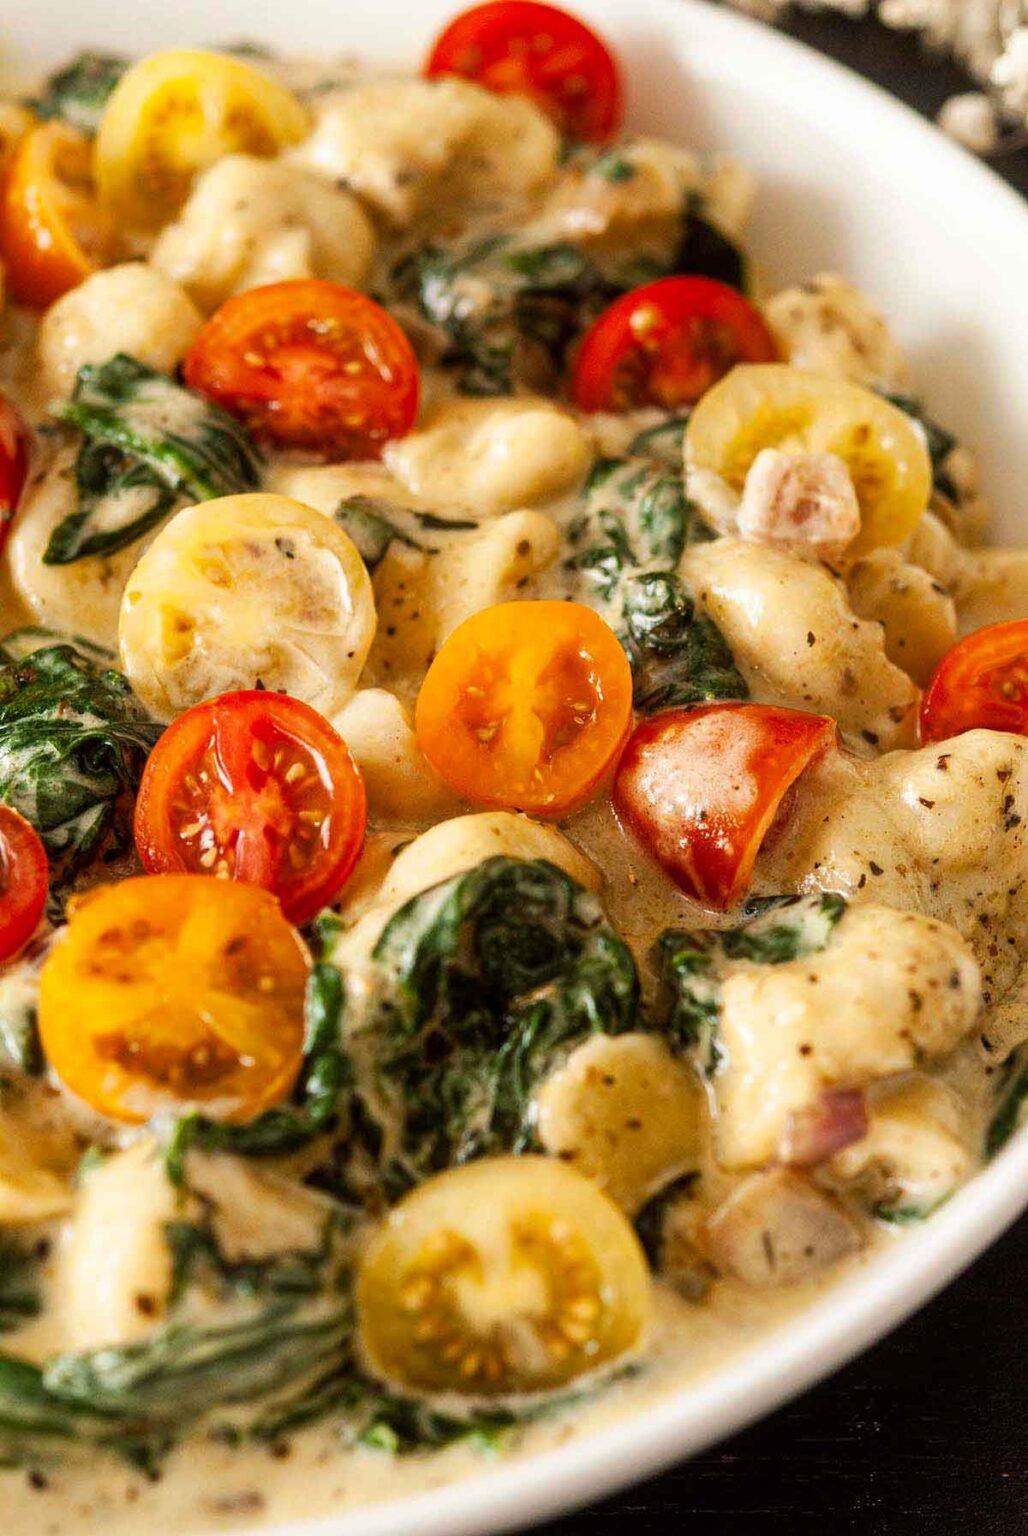 Tuscan Gnocchi with Spinach and Cherry Tomatoes